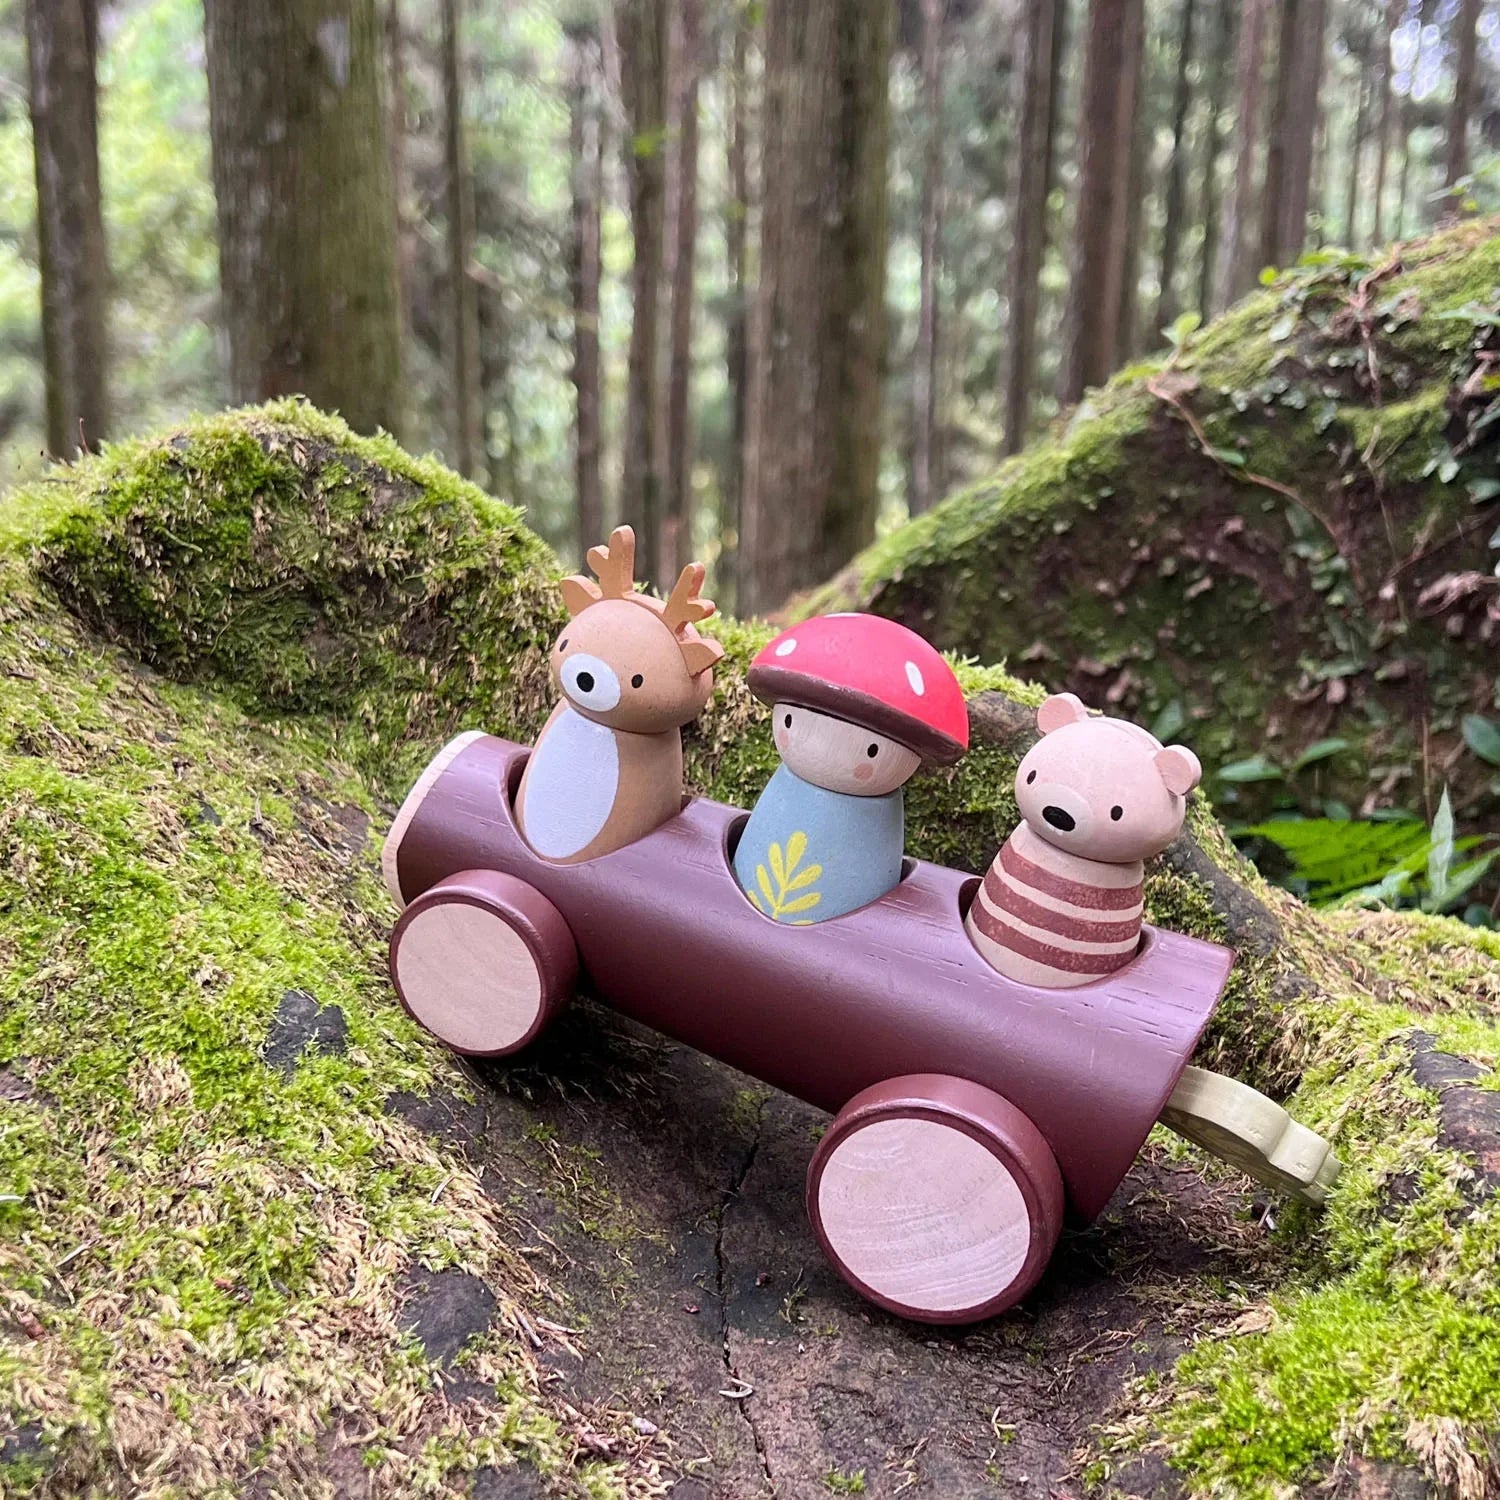 Tender Leaf Toys: wooden forest cab with figures Timber Taxi